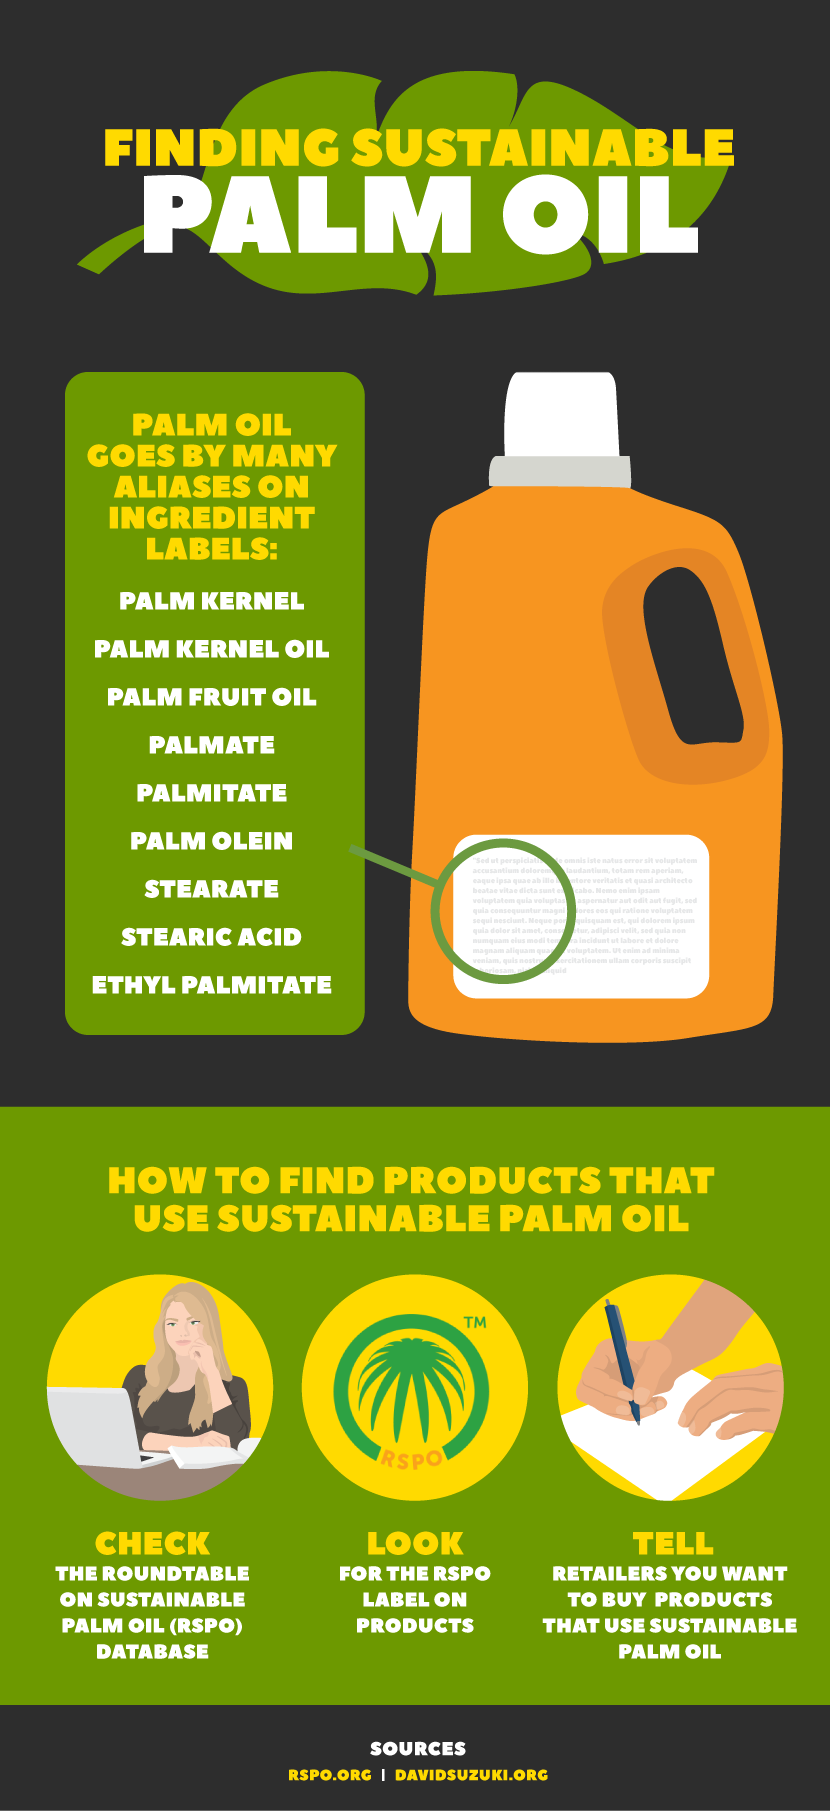 Finding Sustainable Palm Oil - The Perils of Palm Oil